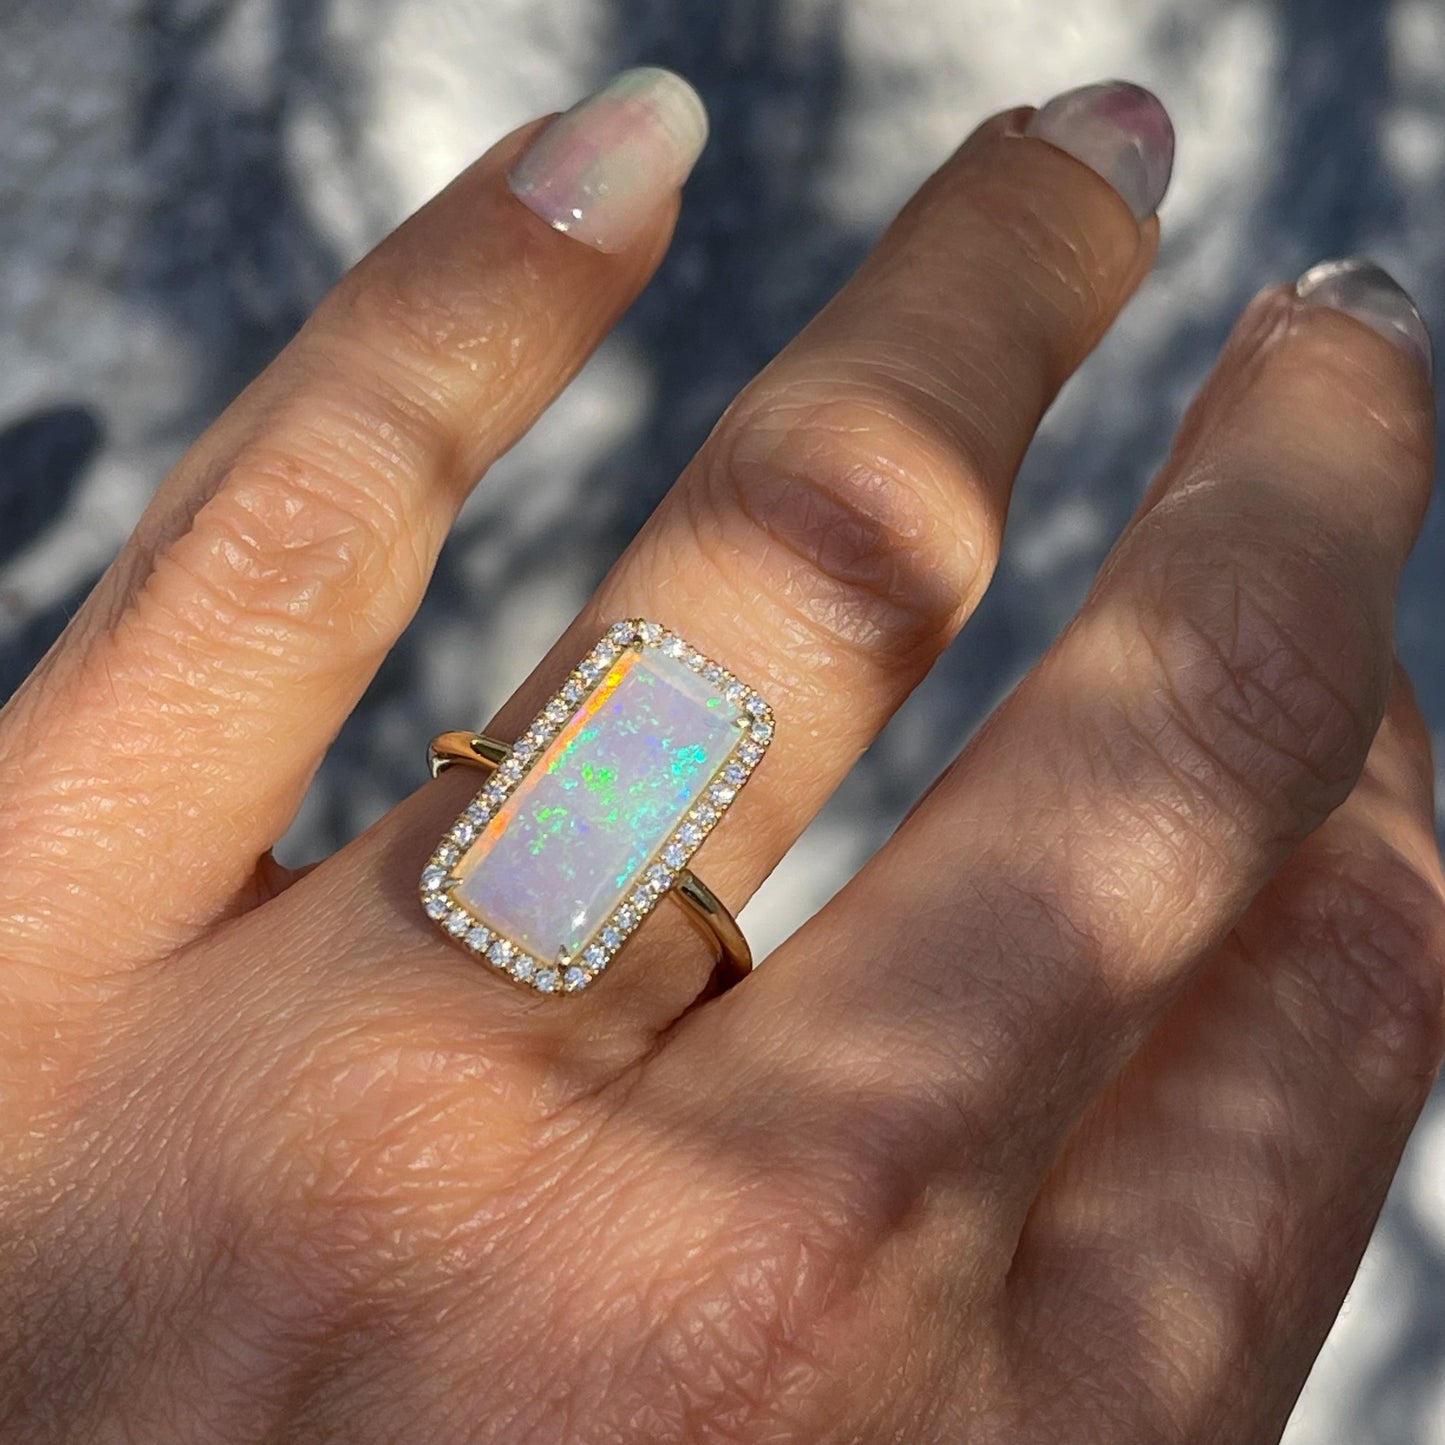 An Australian Opal Ring by NIXIN Jewelry modeled on the hand. The Crystal Opal shows a lavender base with blue and green fire.